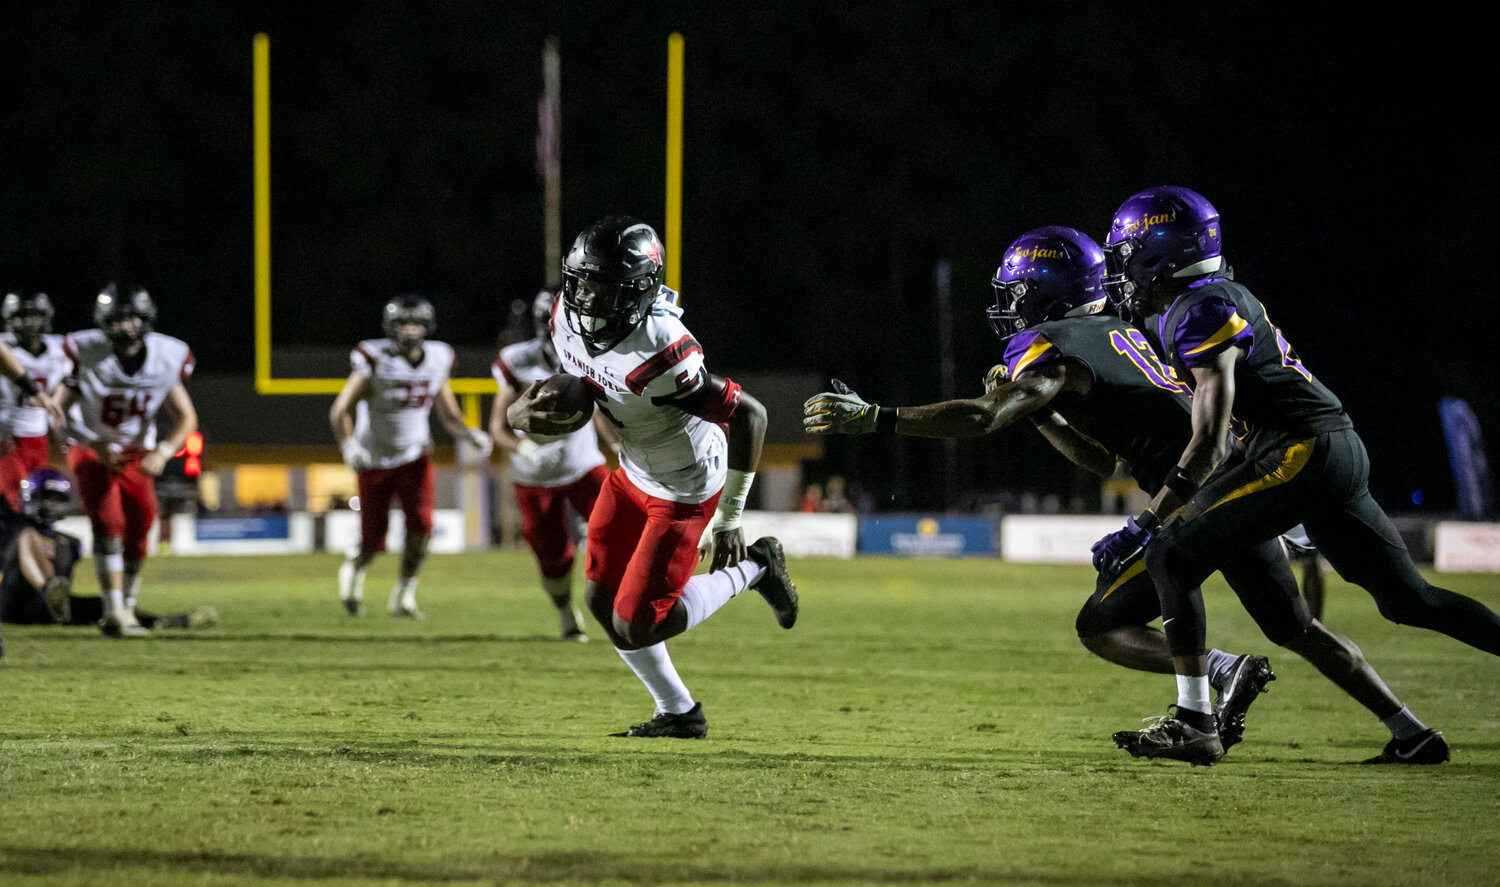 Justin Bonner evades a pair of Daphne defenders and eyes the goal line on his second of two touchdown catches from sophomore Aaden Shamburger during Spanish Fort’s 35-27, comeback win over the Trojans on the road Friday night.